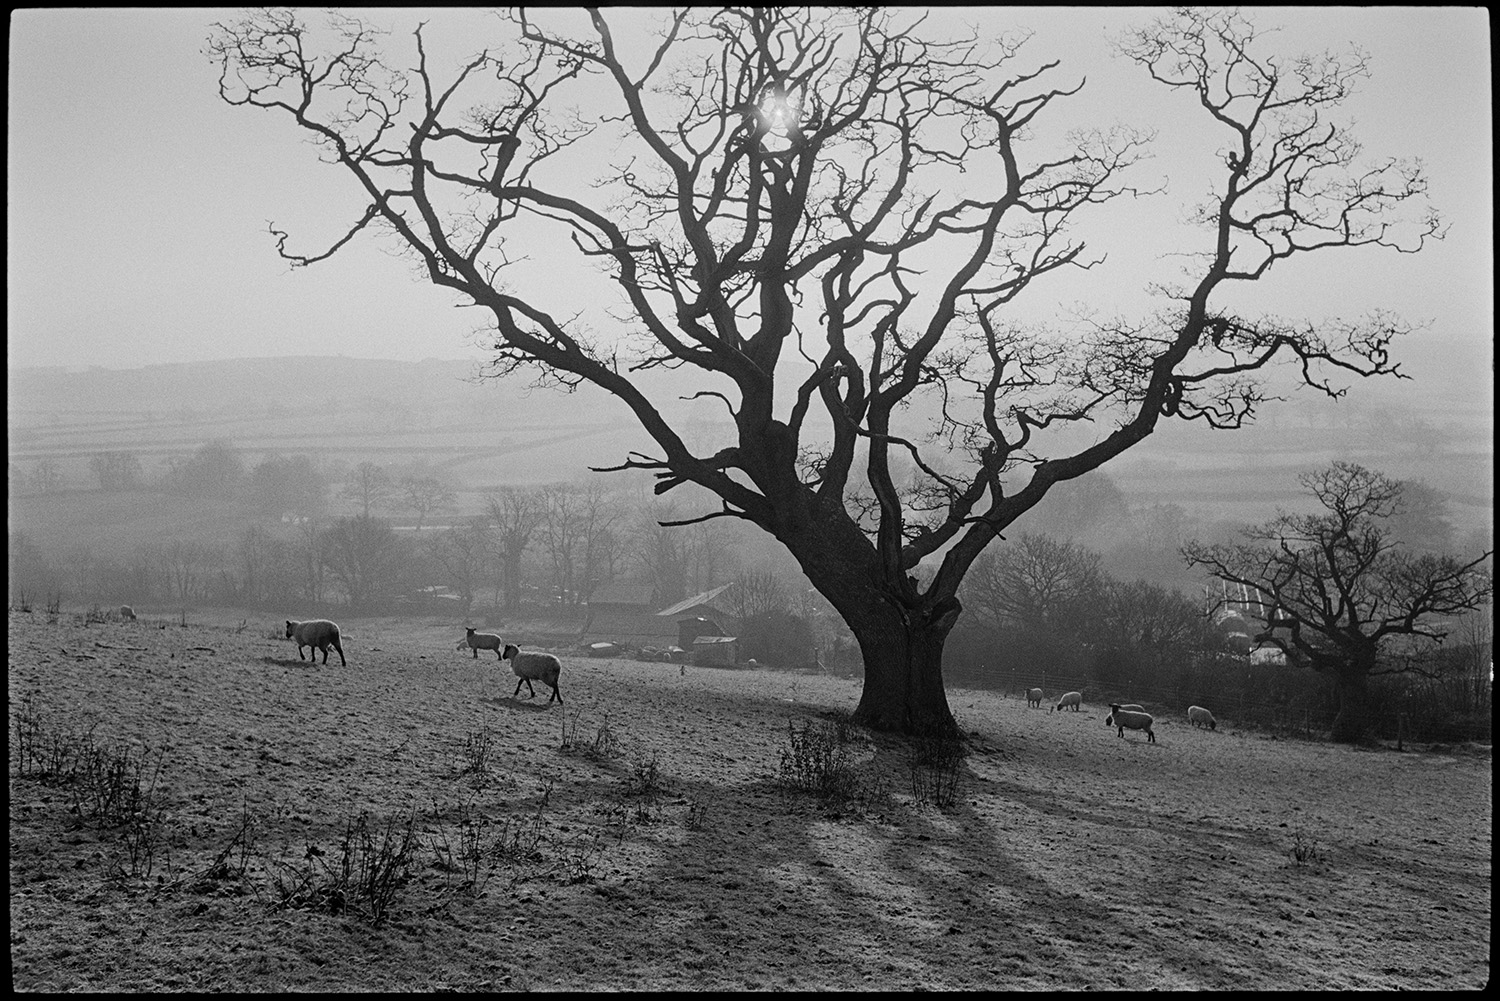 Large trees in field with sheep, abandoned car under fir tree, early morning.
[A flock of sheep in a field with a large oak tree at Brushford Barton. A number of farm buildings are visible with a misty landscape of trees and fields in the background. The oak tree is casting a shadow across the field.]